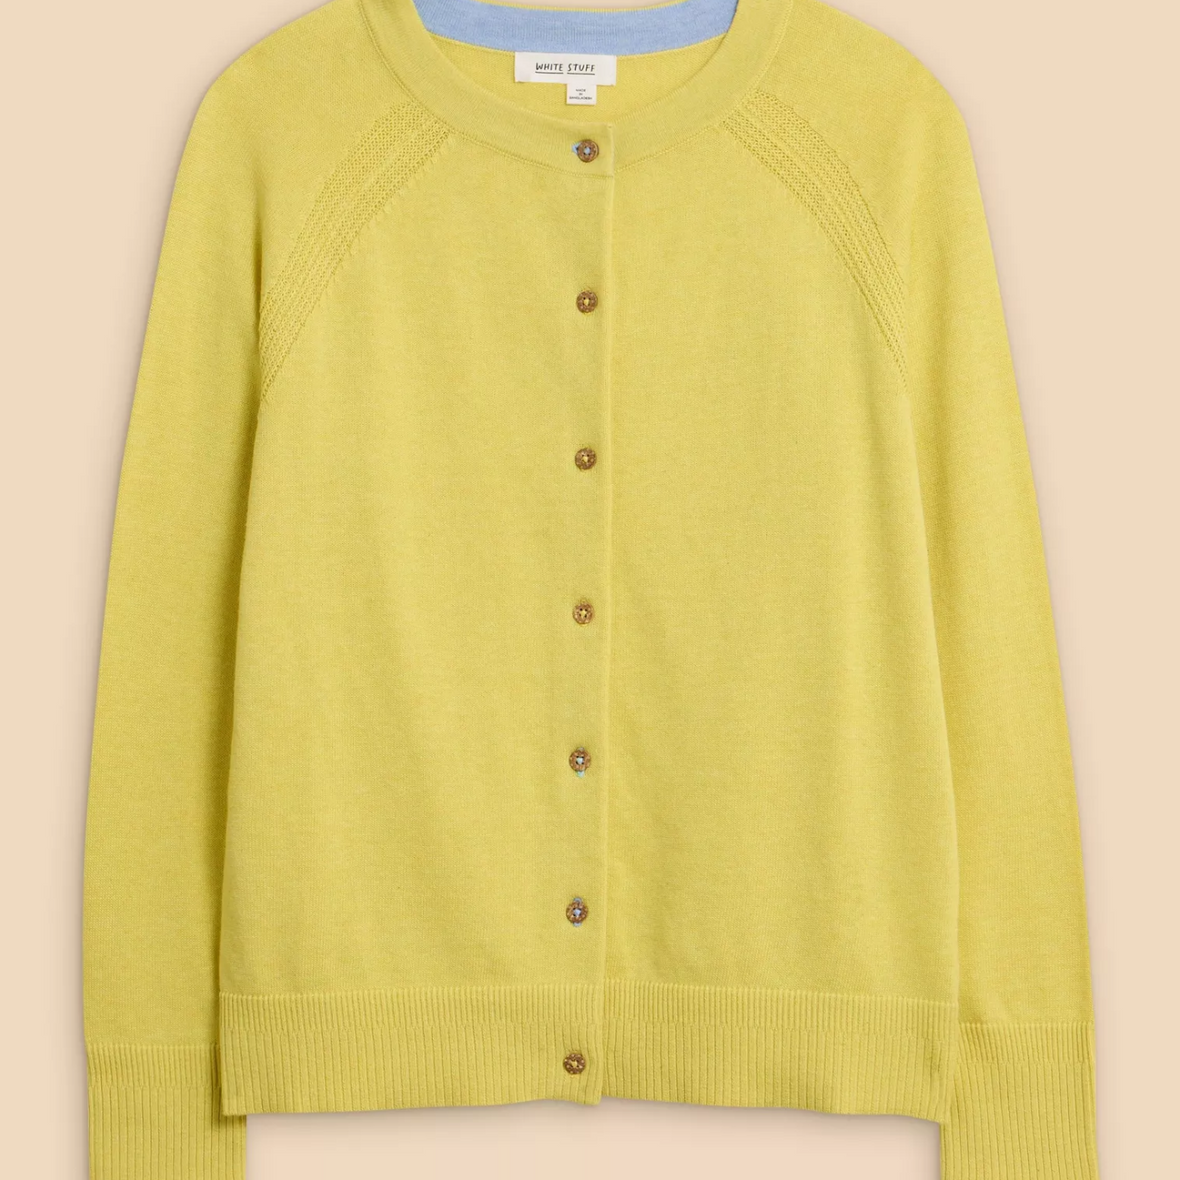 lulu cardi in yellow colour with buttons on the front